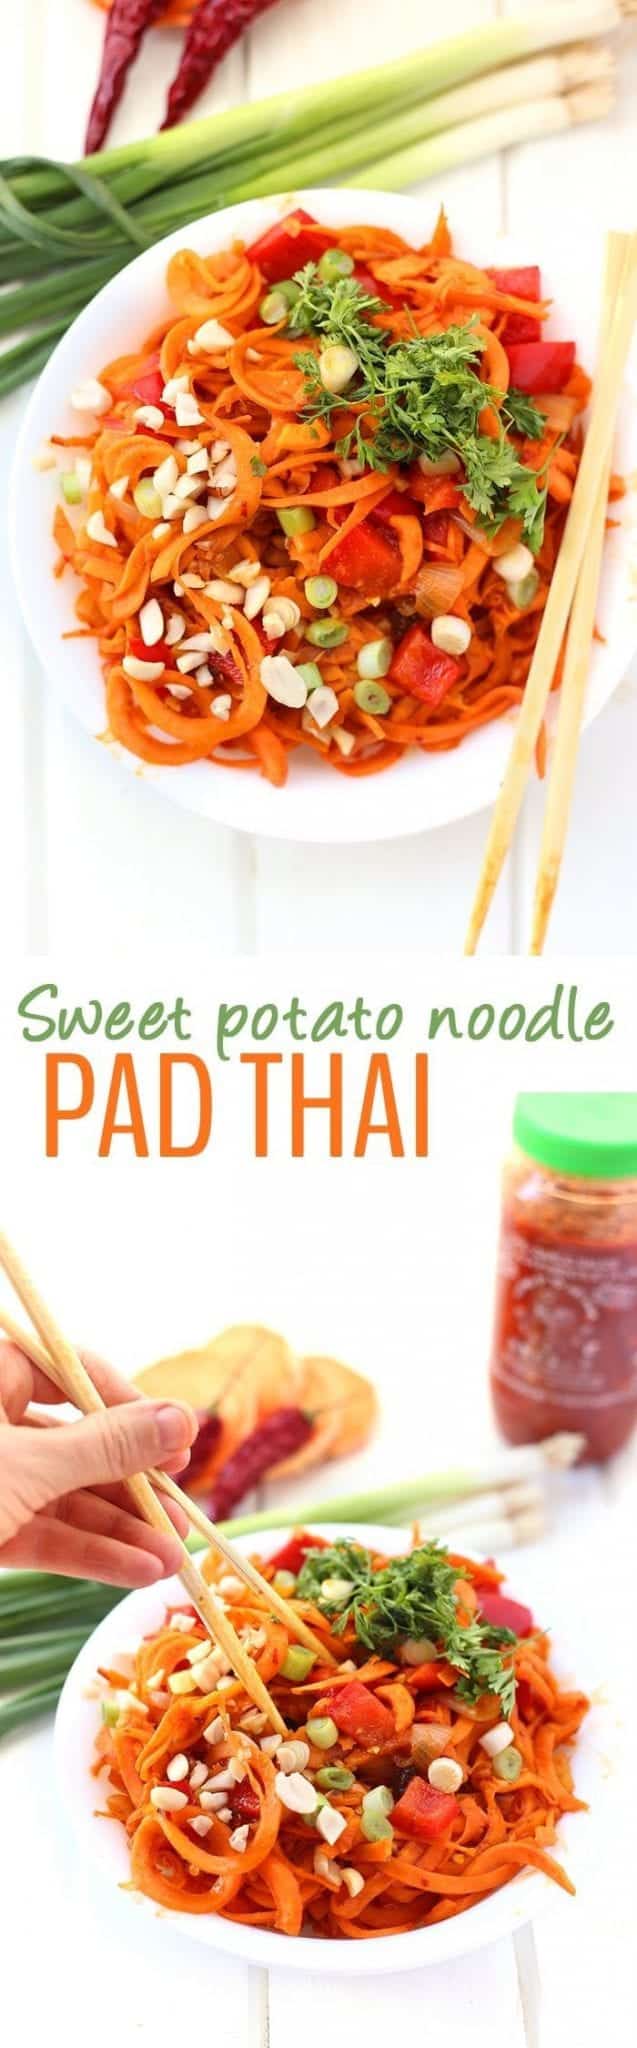 Swap the rice noodles for sweet potato in this healthy Sweet Potato Noodle Pad Thai. This tangy and spicy thai recipe makes an easy 30-minute meal for weekday dinners!